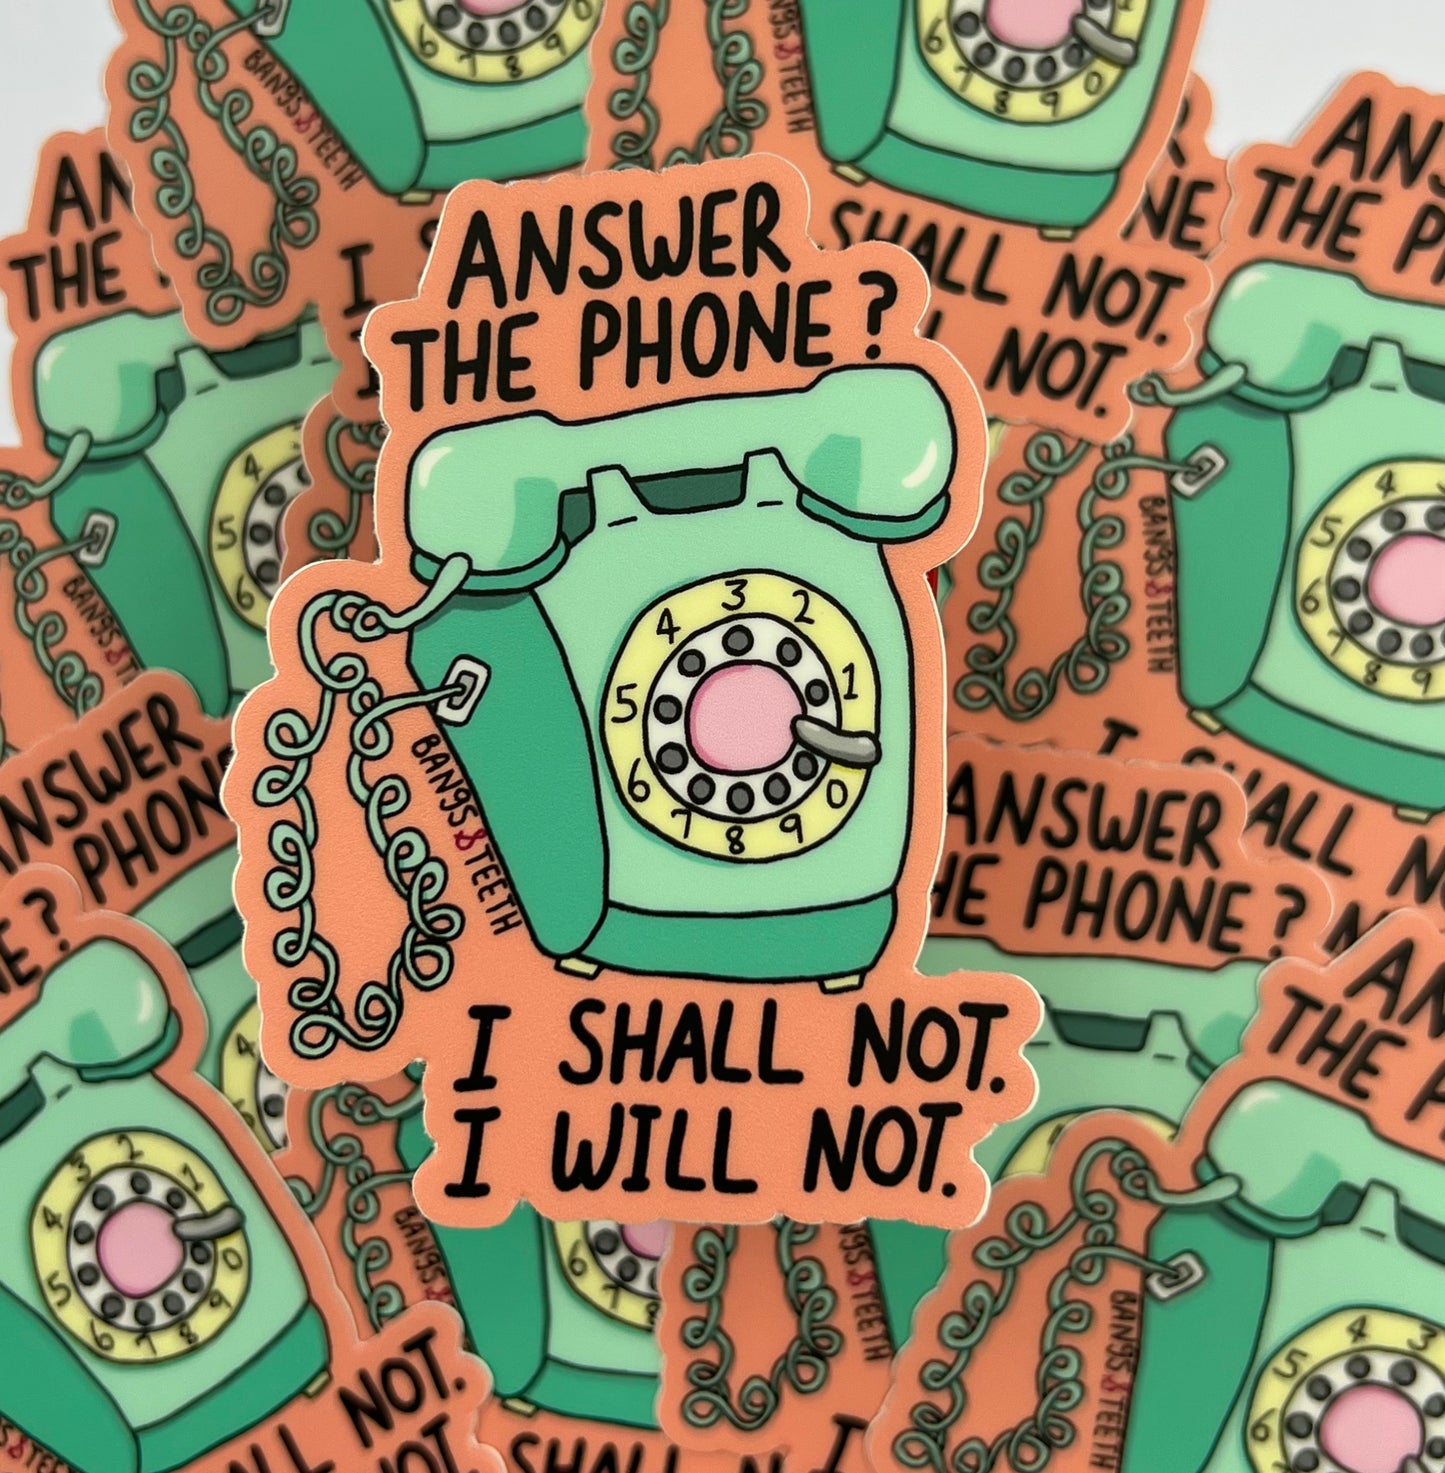 Answer The Phone? I Shall Not sticker